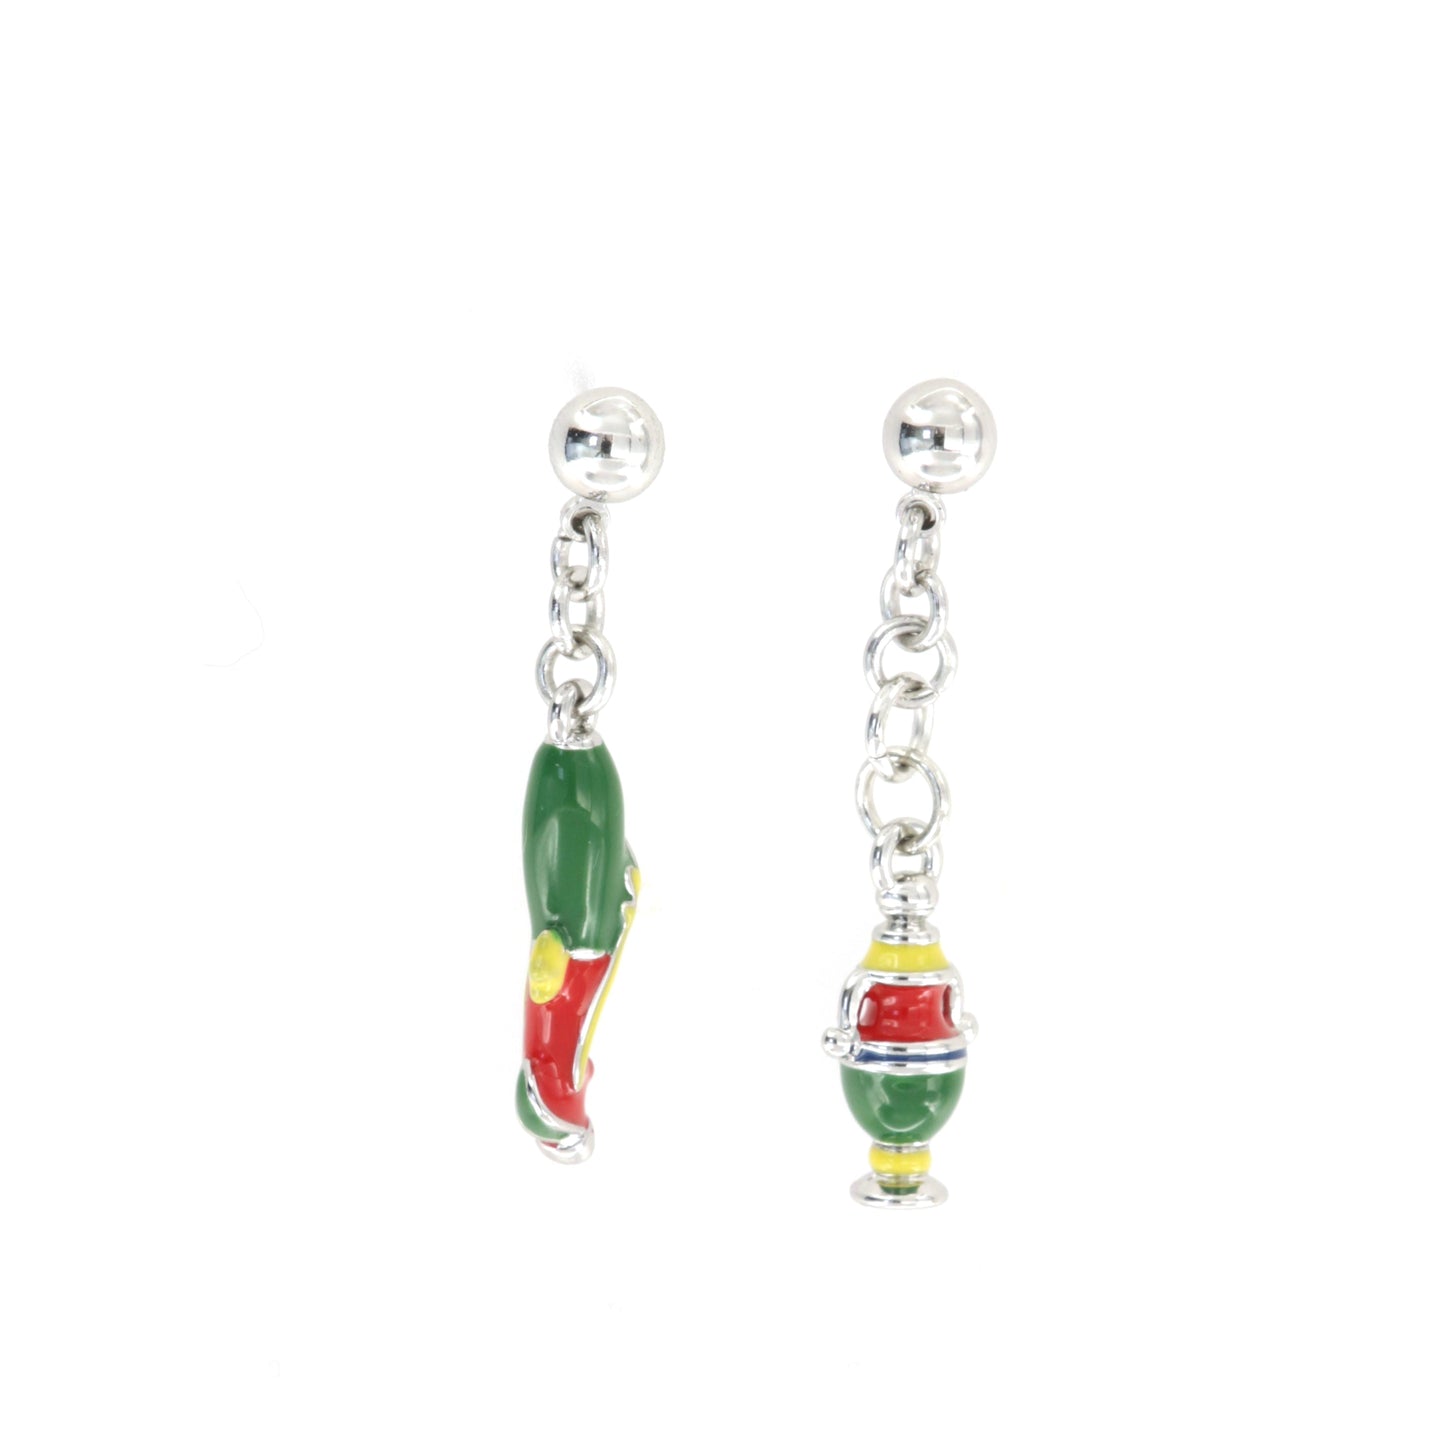 Metal earrings with Sicilian cards pending cards embellished with enamels